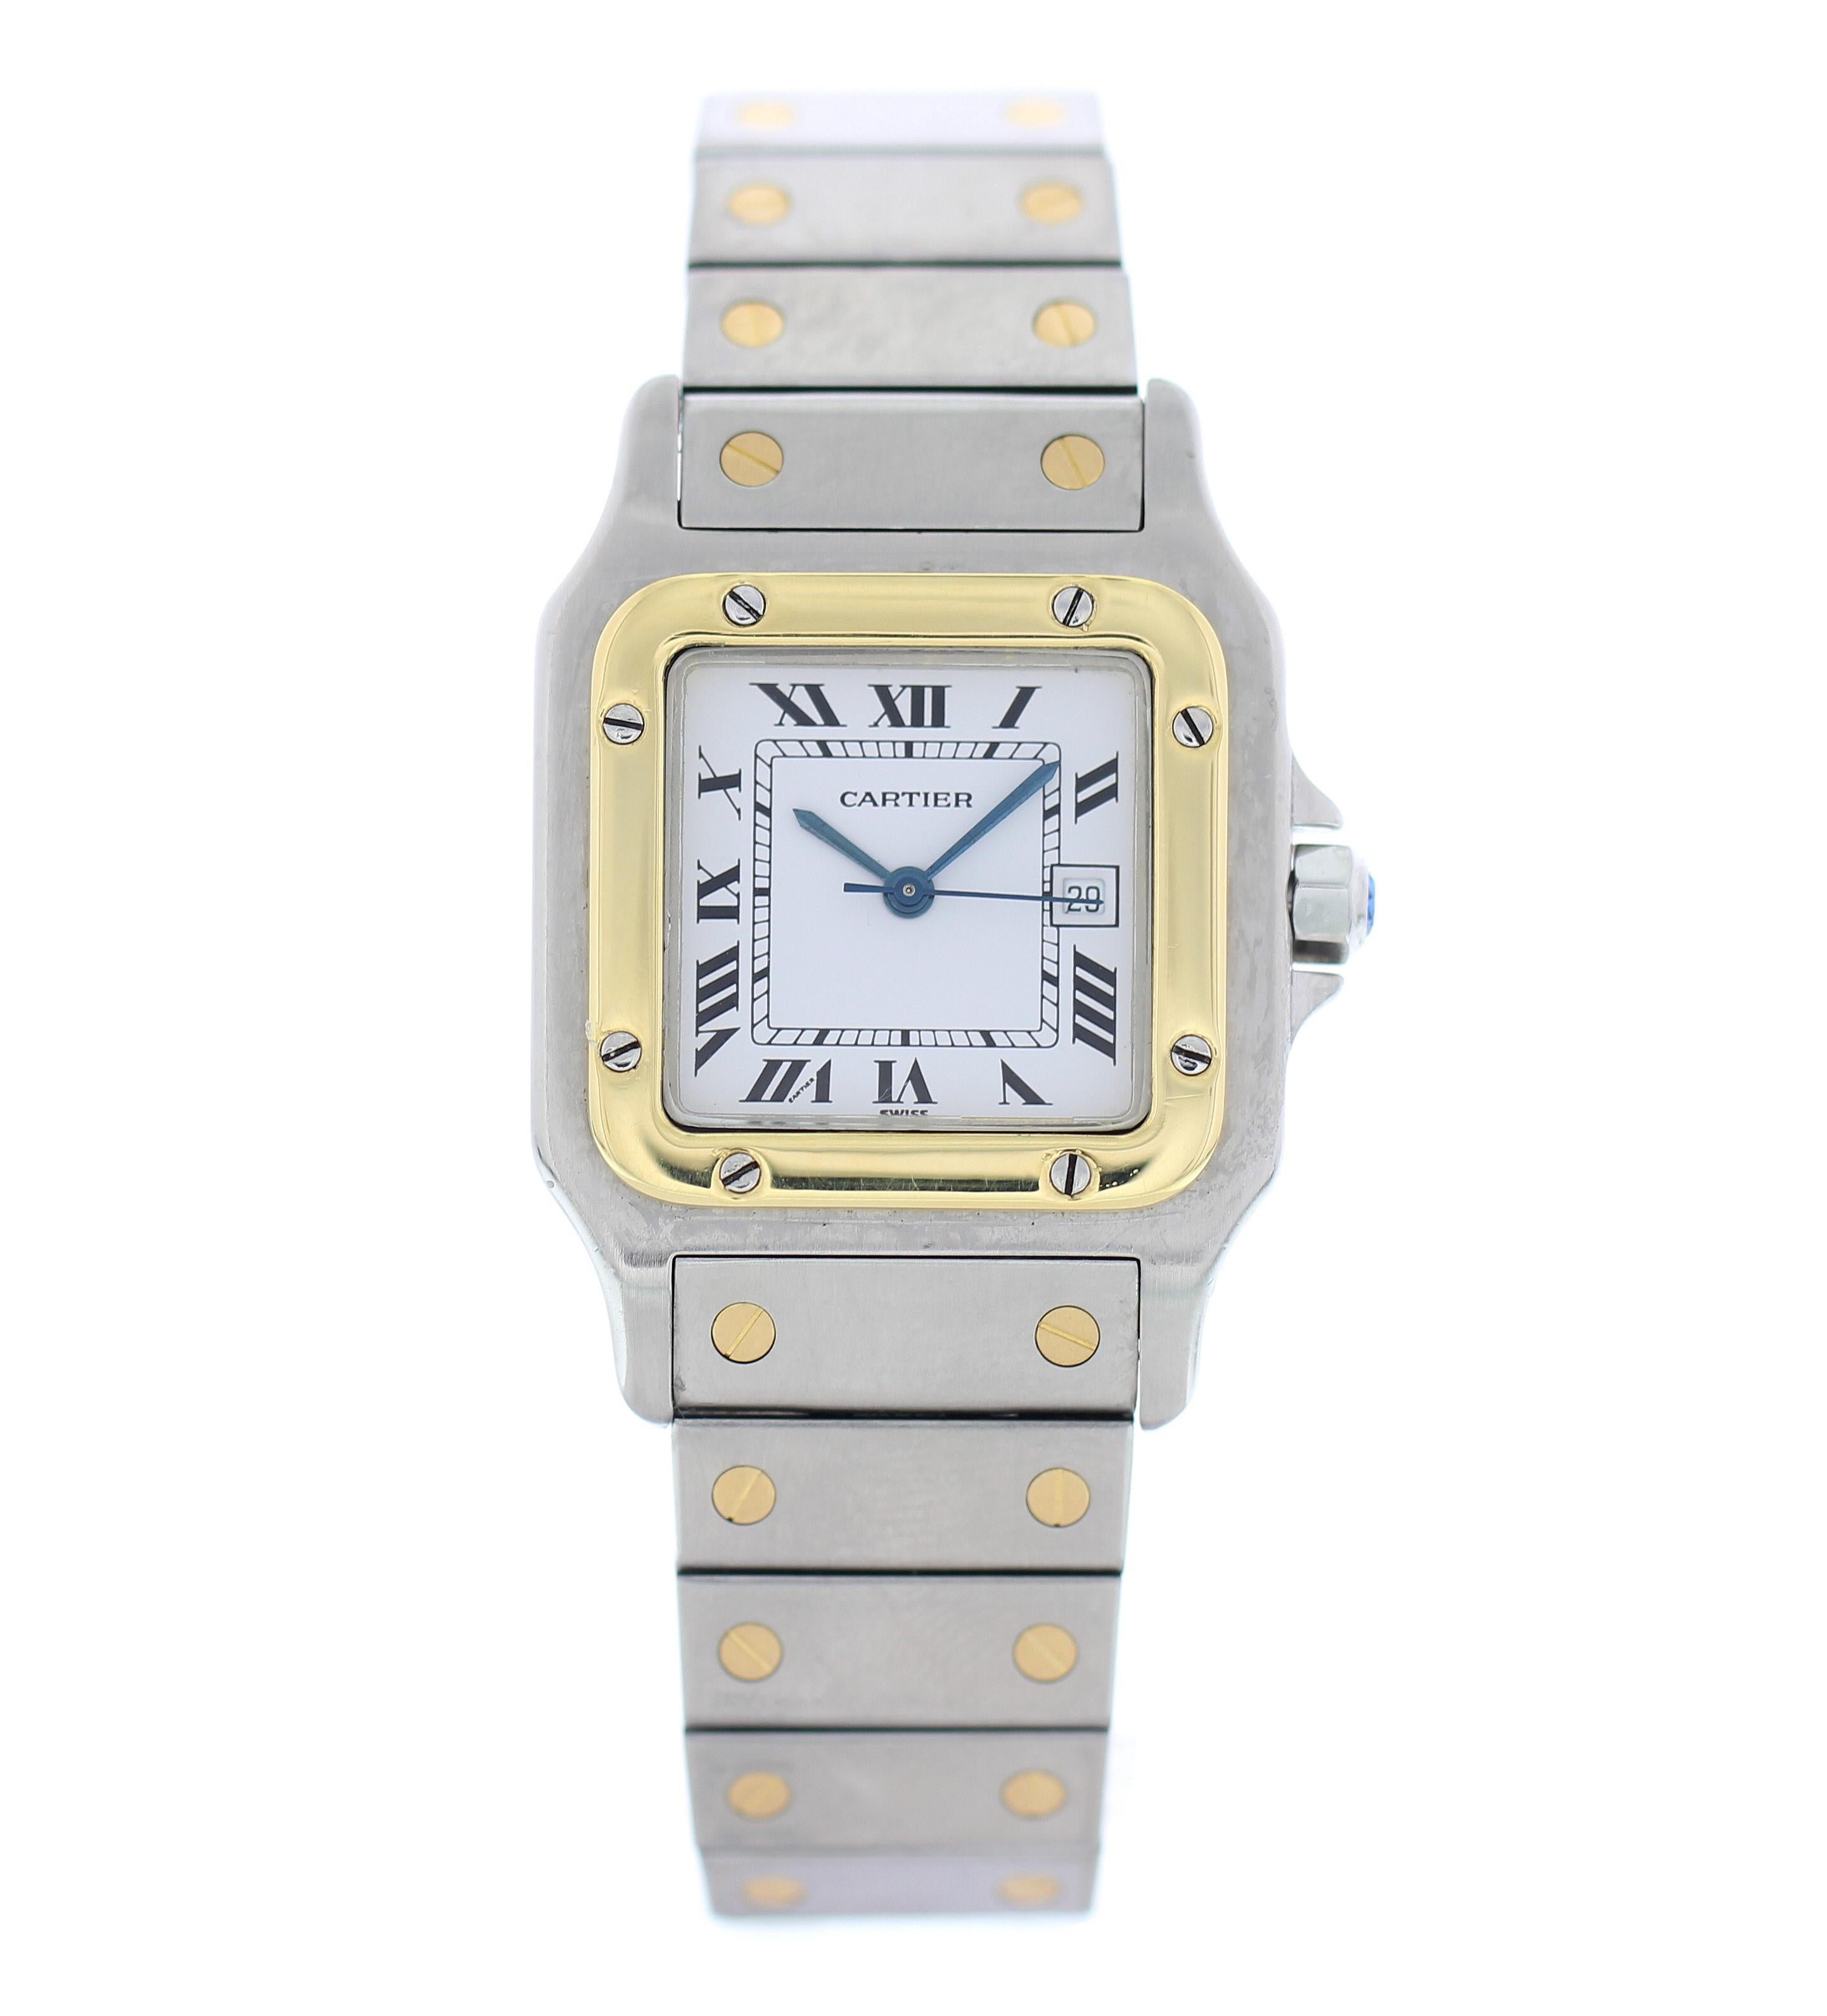 Cartier Santos Galbee 1566 Automatic Watch. 
29mm Stainless Steel case. 
Yellow Gold None bezel. 
White dial with Blue steel hands and roman numeral hour markers. 
Minute markers on the outer dial. 
Date display at the 3 o'clock position. 
Stainless